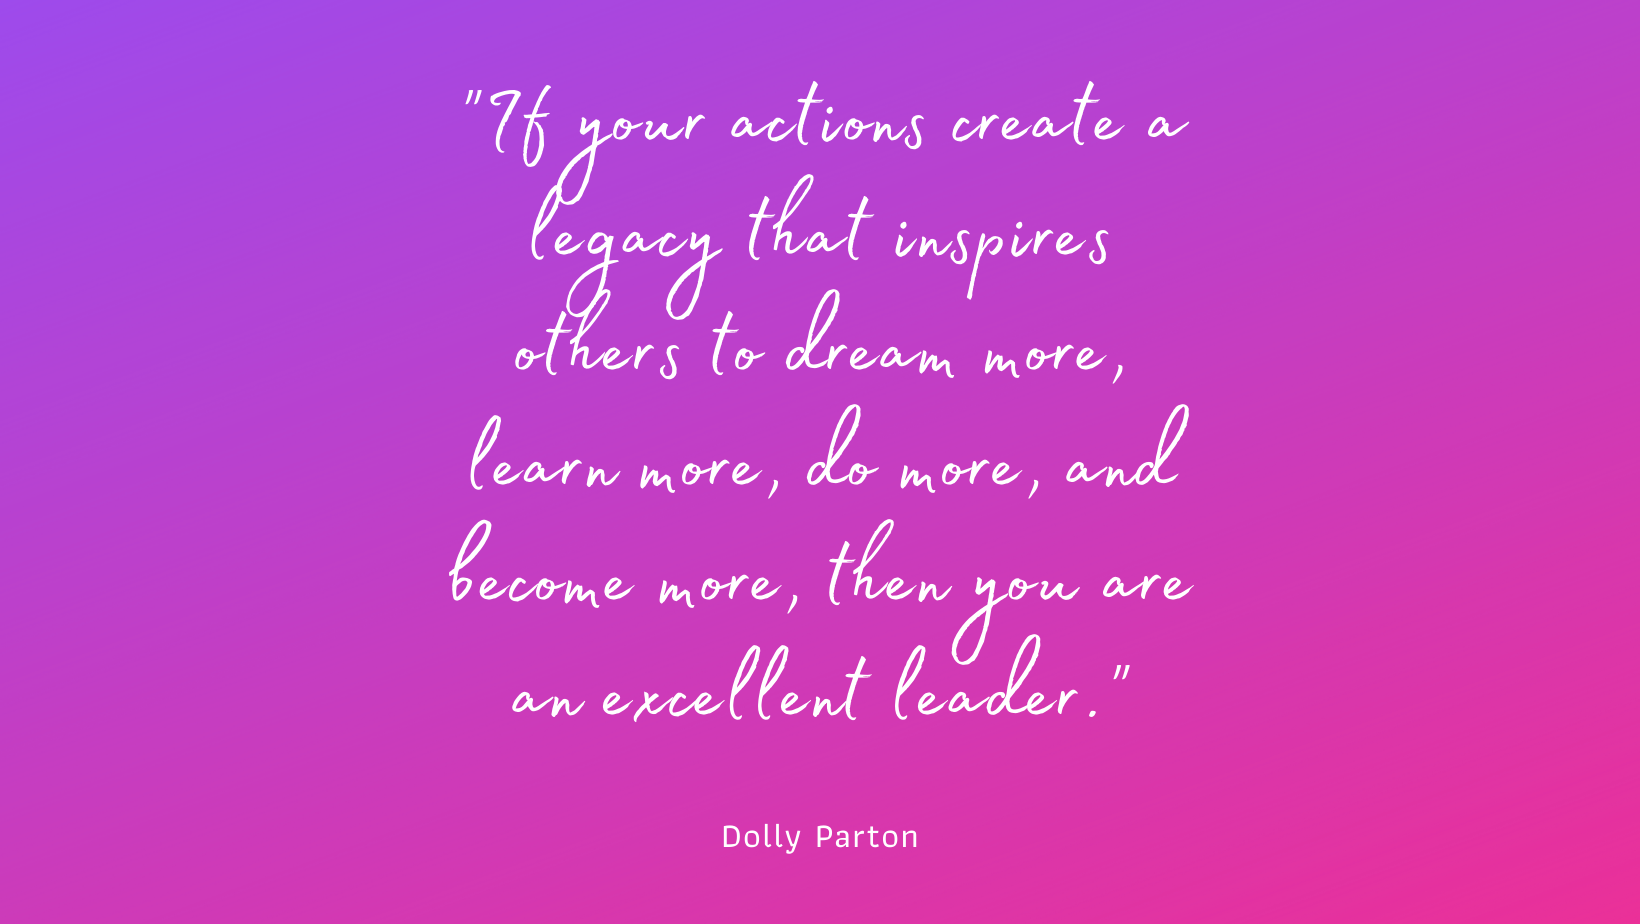 Dolly Parton Quote - Womens Month (2)